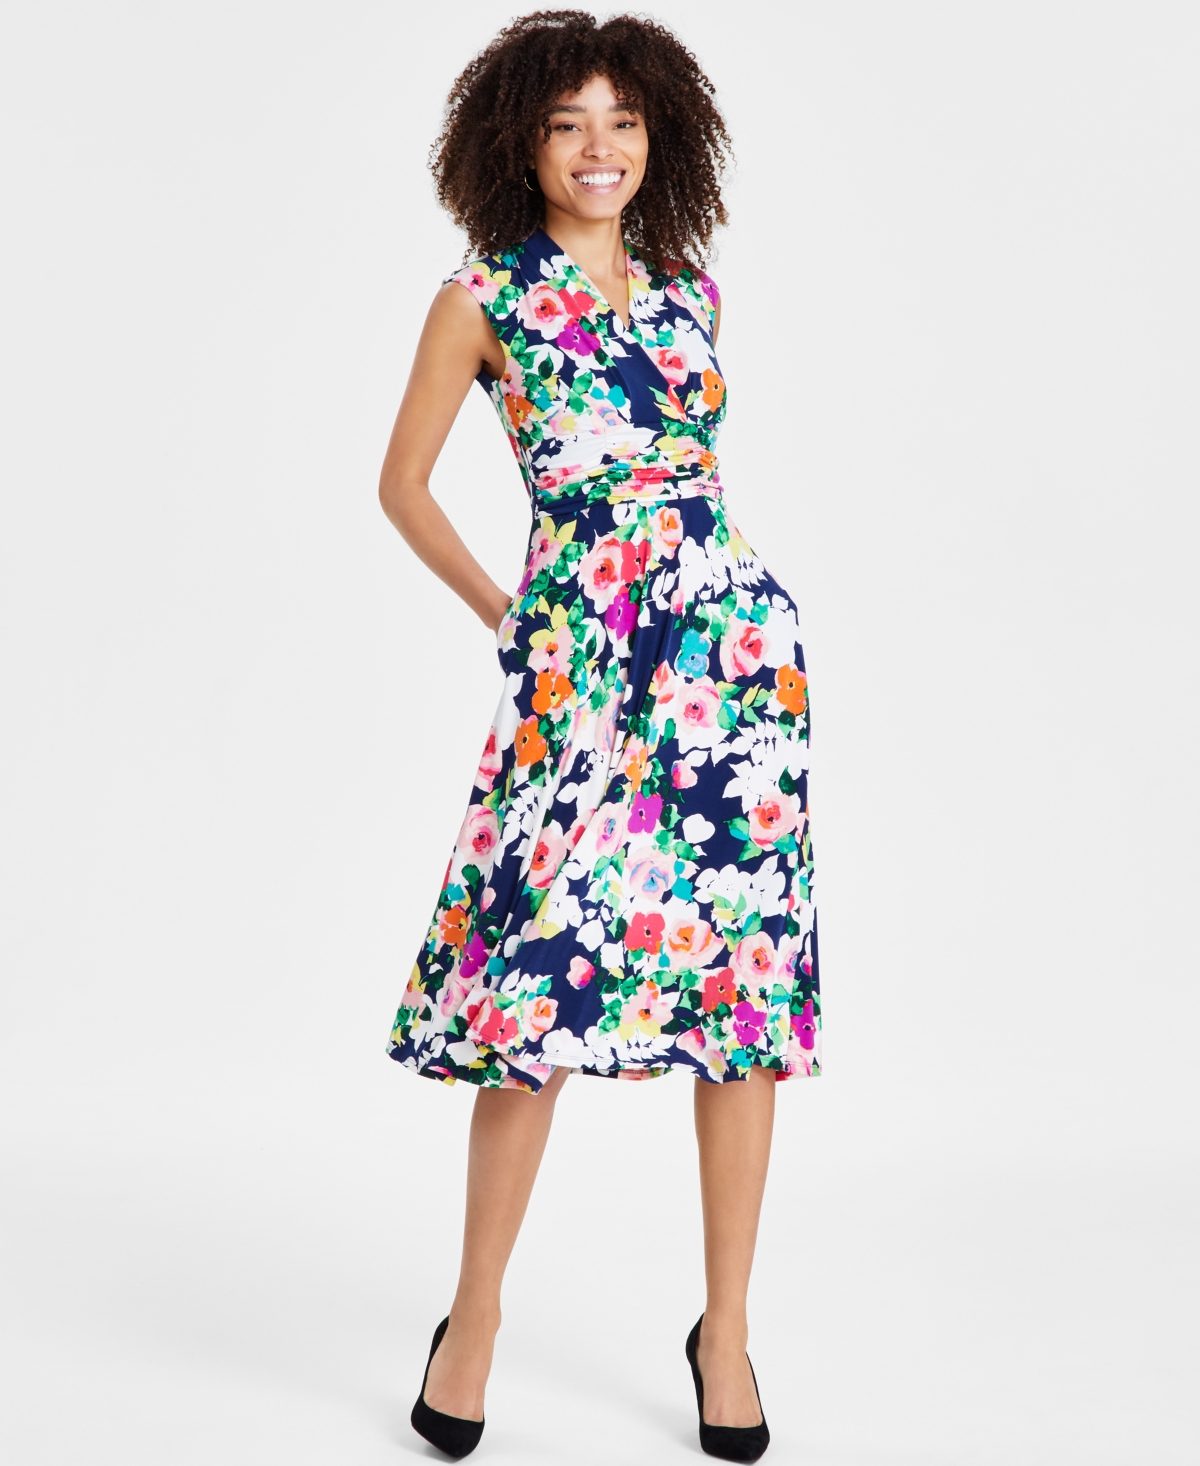 Women's Sleeveless Floral Fit & Flare Dress - Navy Ivory